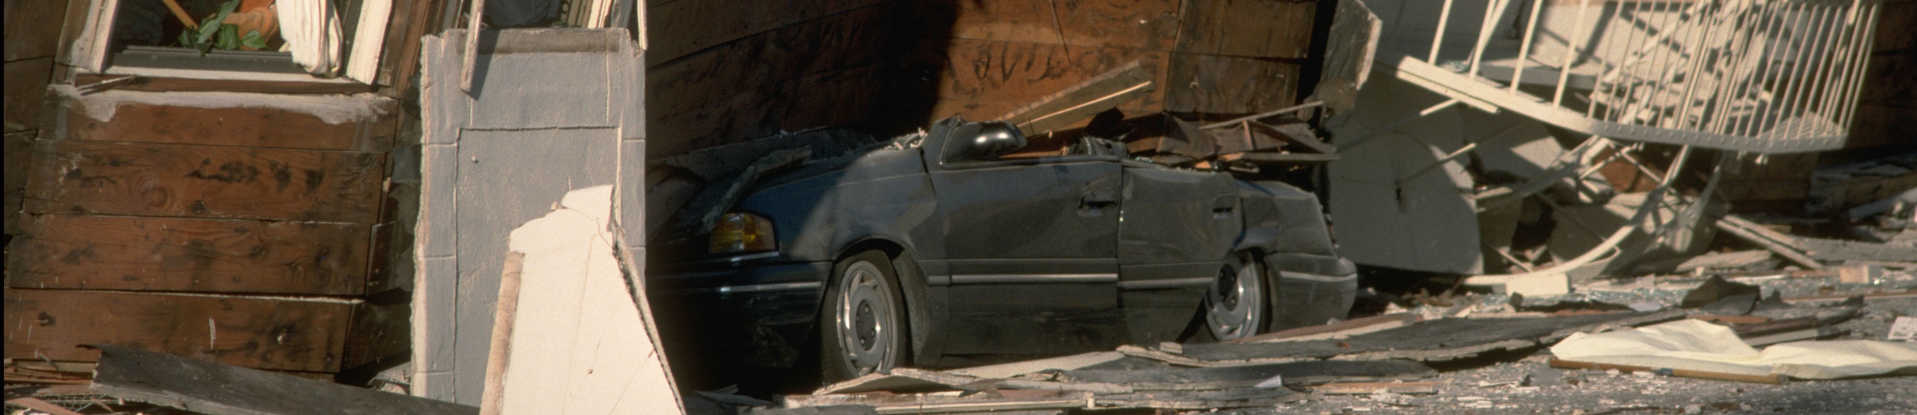 Automobile crushed under building after 1989 Loma Prieta earthquake in California